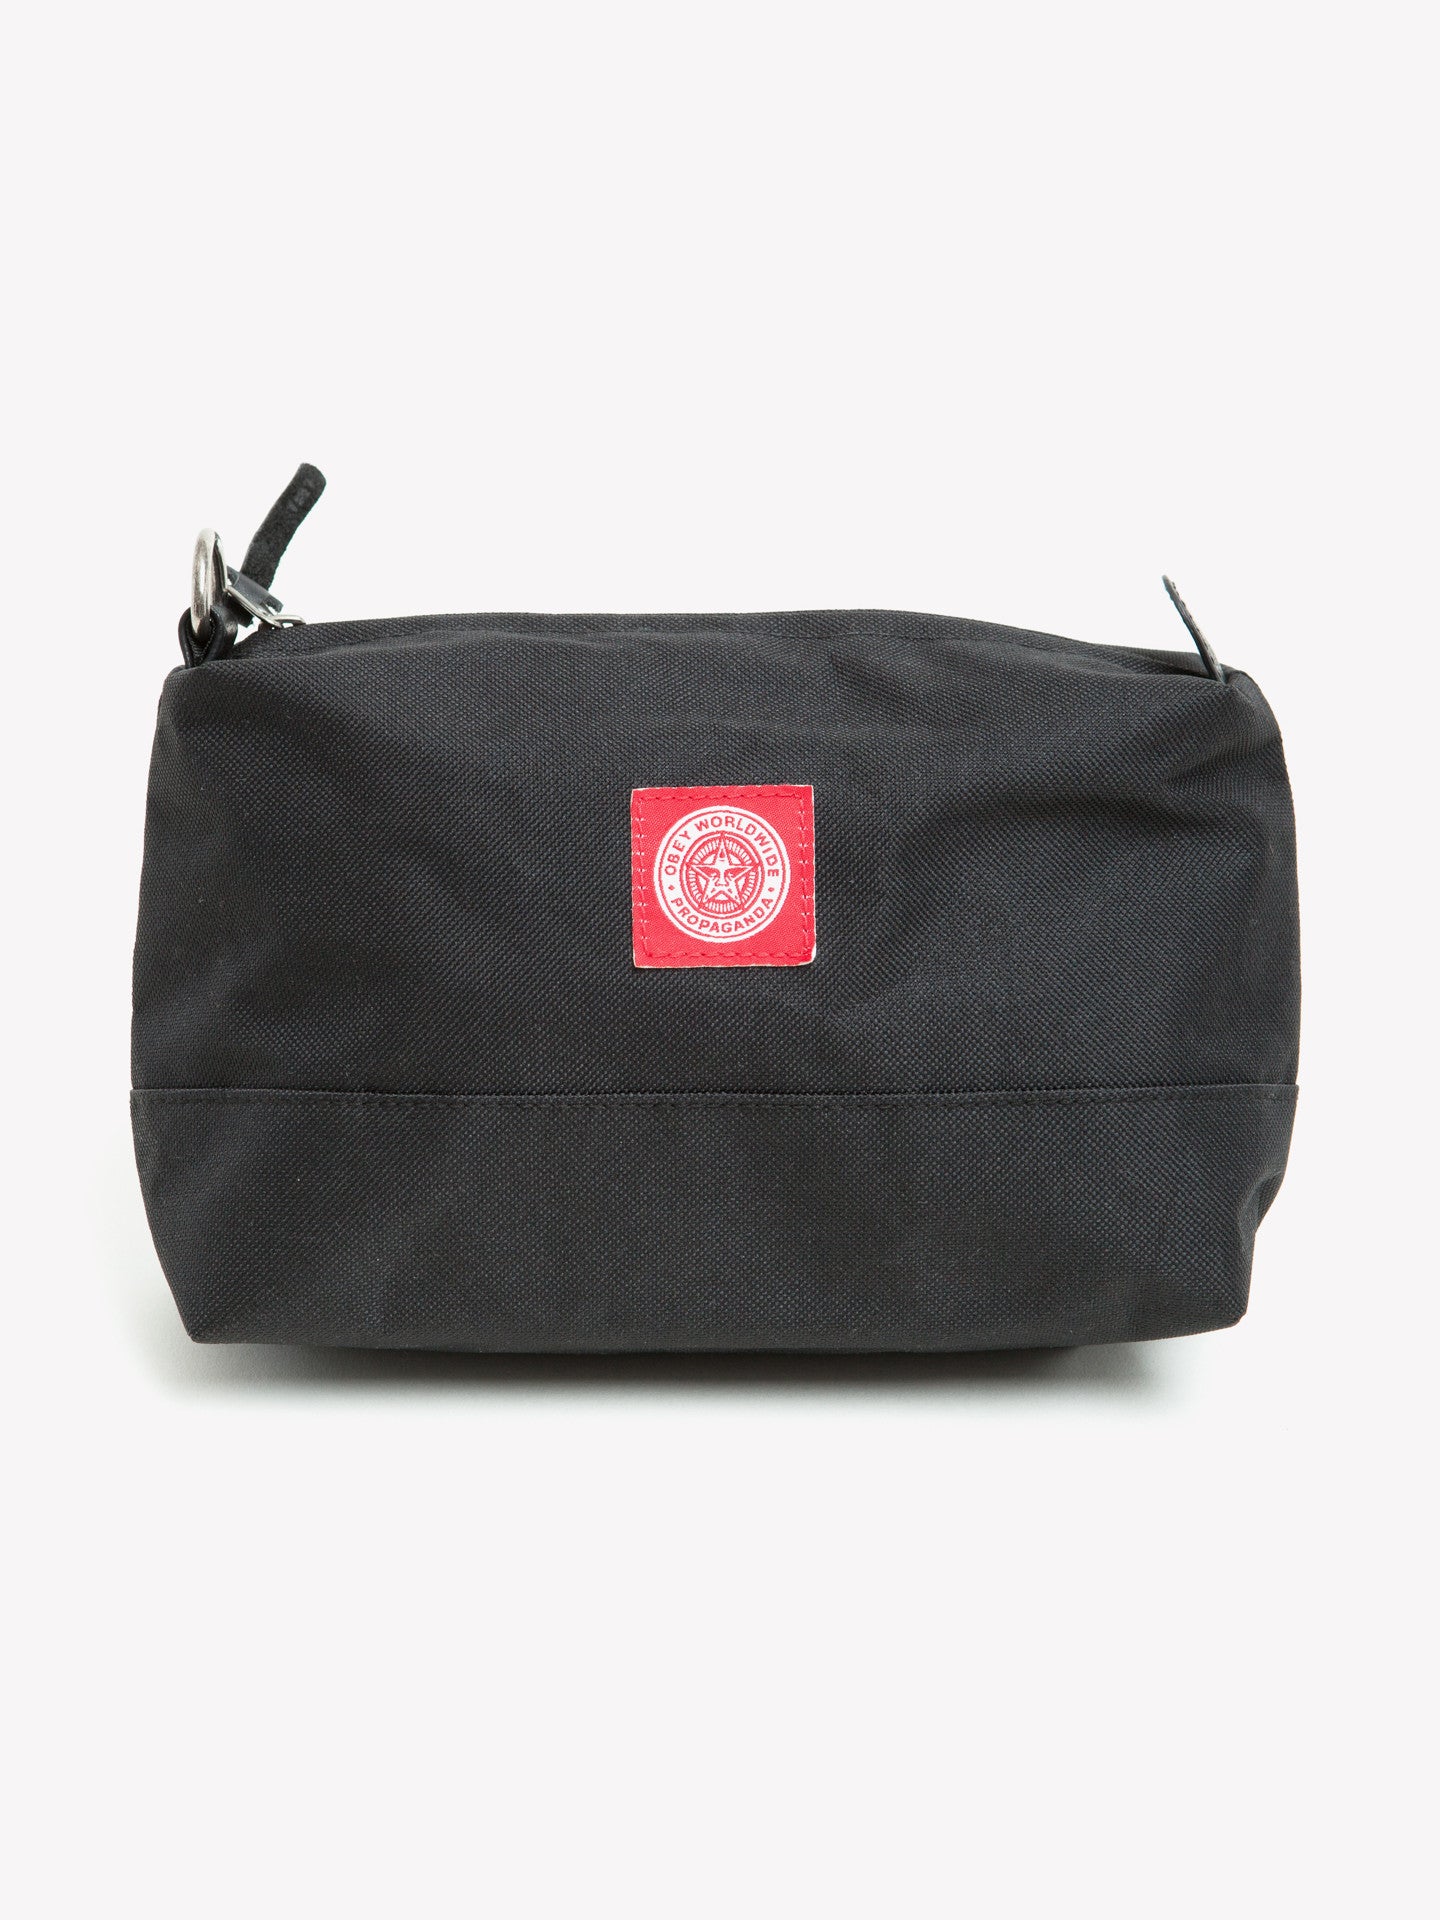 OBEY - Revolt Red Wash Bag, Black - The Giant Peach